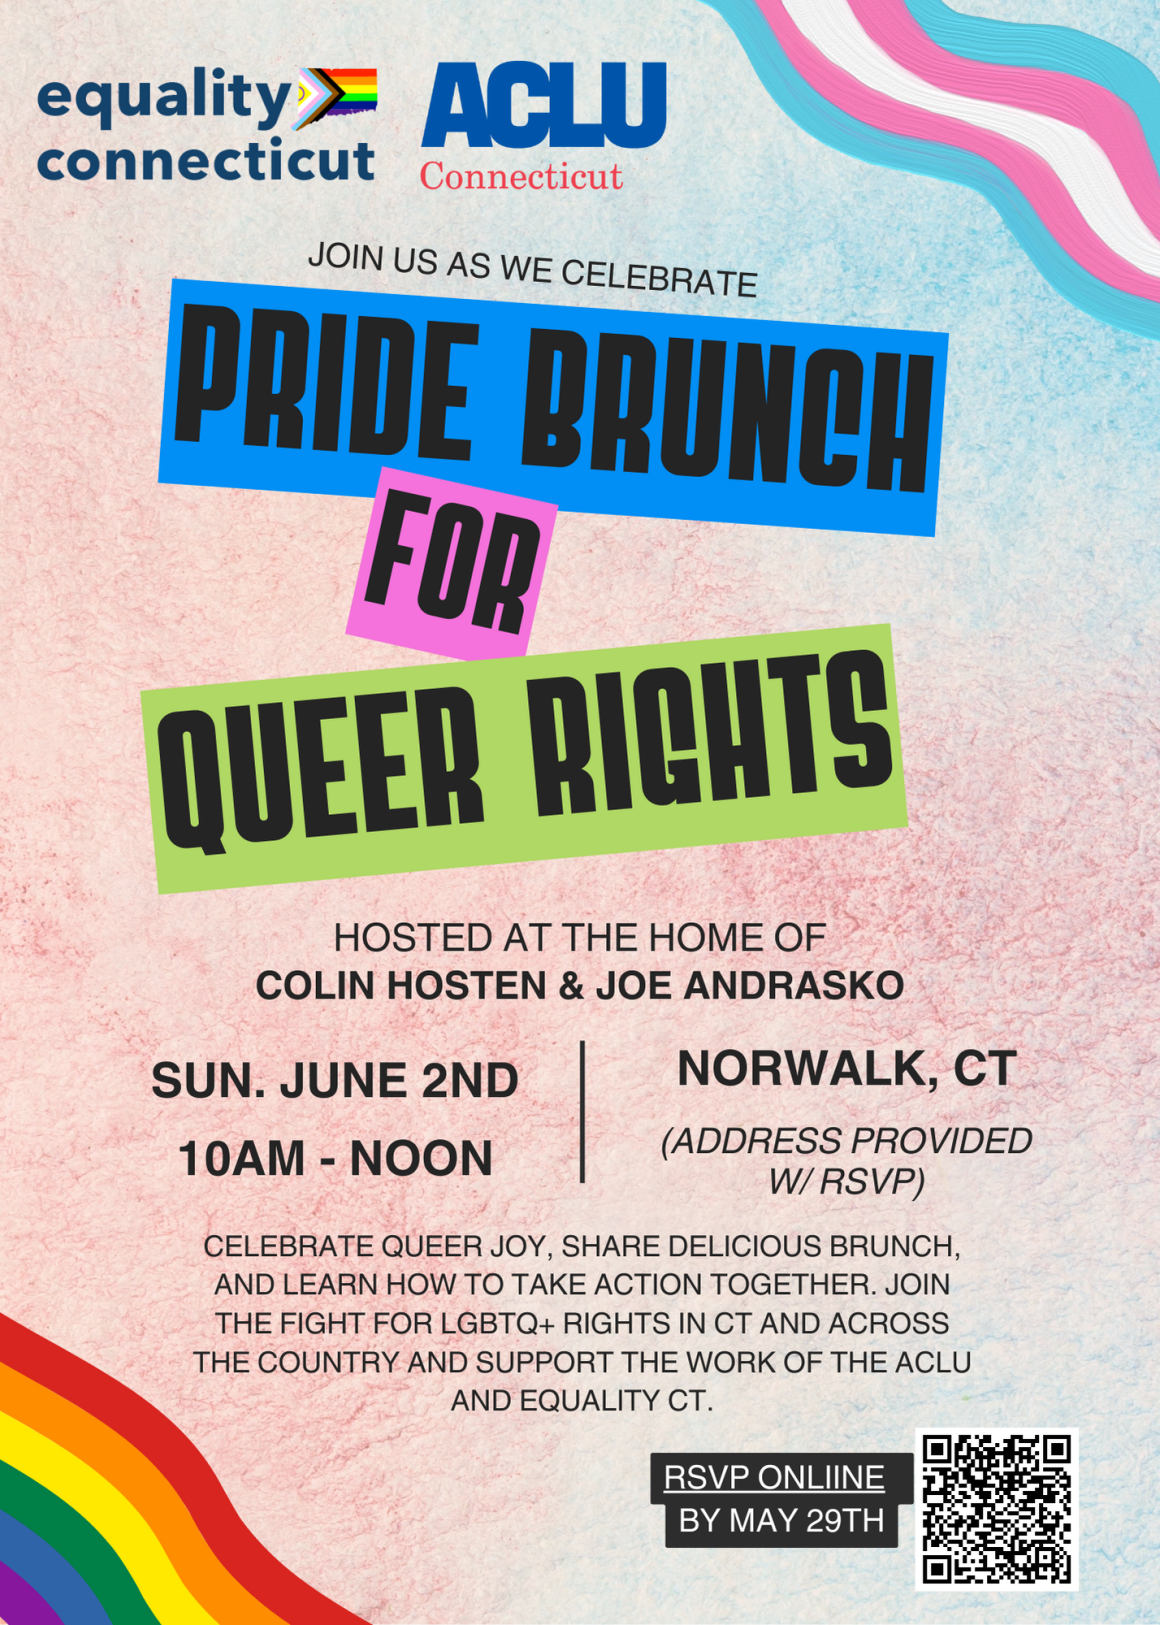 PRIDE BRUNCH FOR QUEER RIGHTS: CELEBRATE QUEER JOY, SHARE DELICIOUS BRUNCH, AND LEARN HOW TO ACTION TOGETHER. JOIN THE FIGHT FOR LGBTQ+ RIGHTS IN CT AND ACROSS THE COUNTRY AND SUPPORT THE WORK OF THE ACLU AND EQUALITY CT.